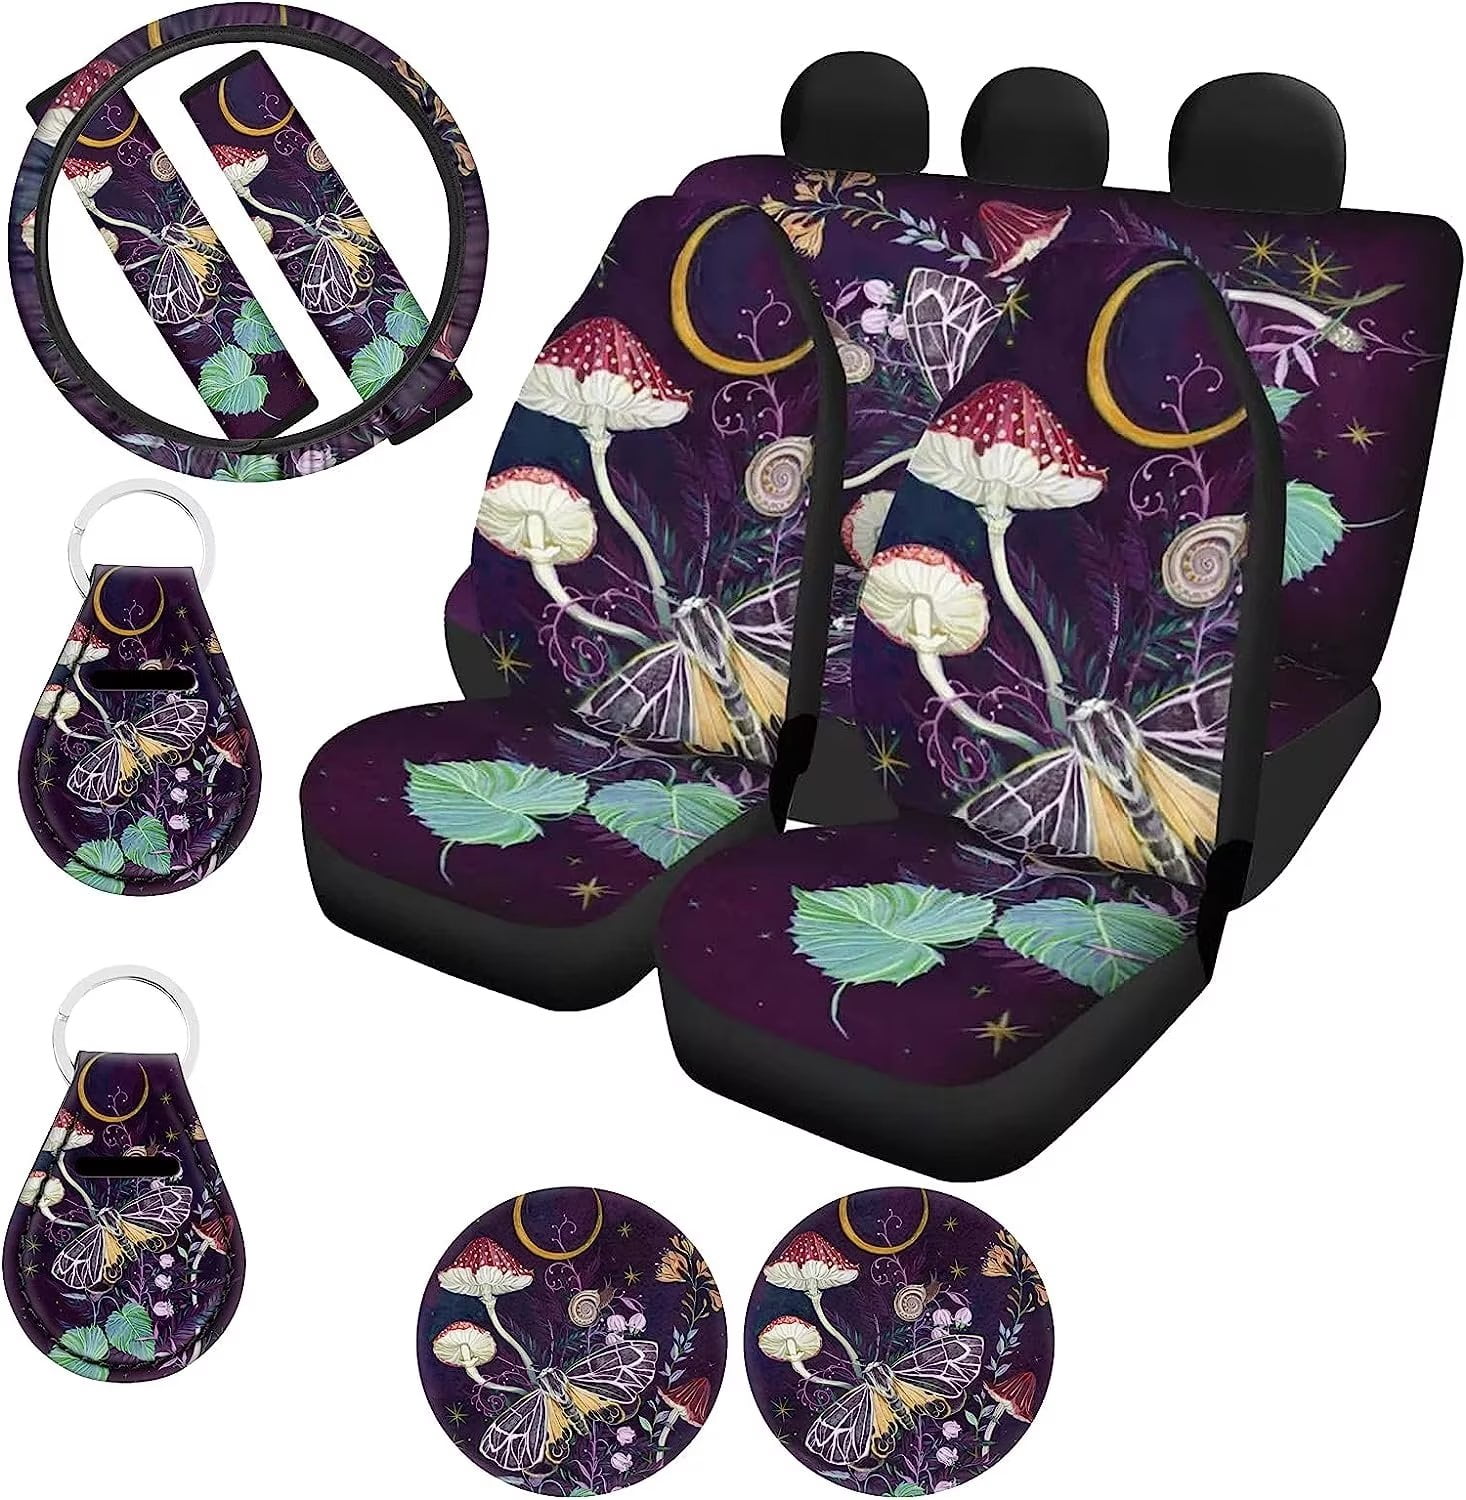  Uourmeti Bat Gothic Car Accessories Car Seat Covers and  Steering Wheel Cover Full Set License Plate Frames Seat Belt Cushion  Keyring Keychain Witchy Colorful Universal Car Decor Gift for Car Lovers 